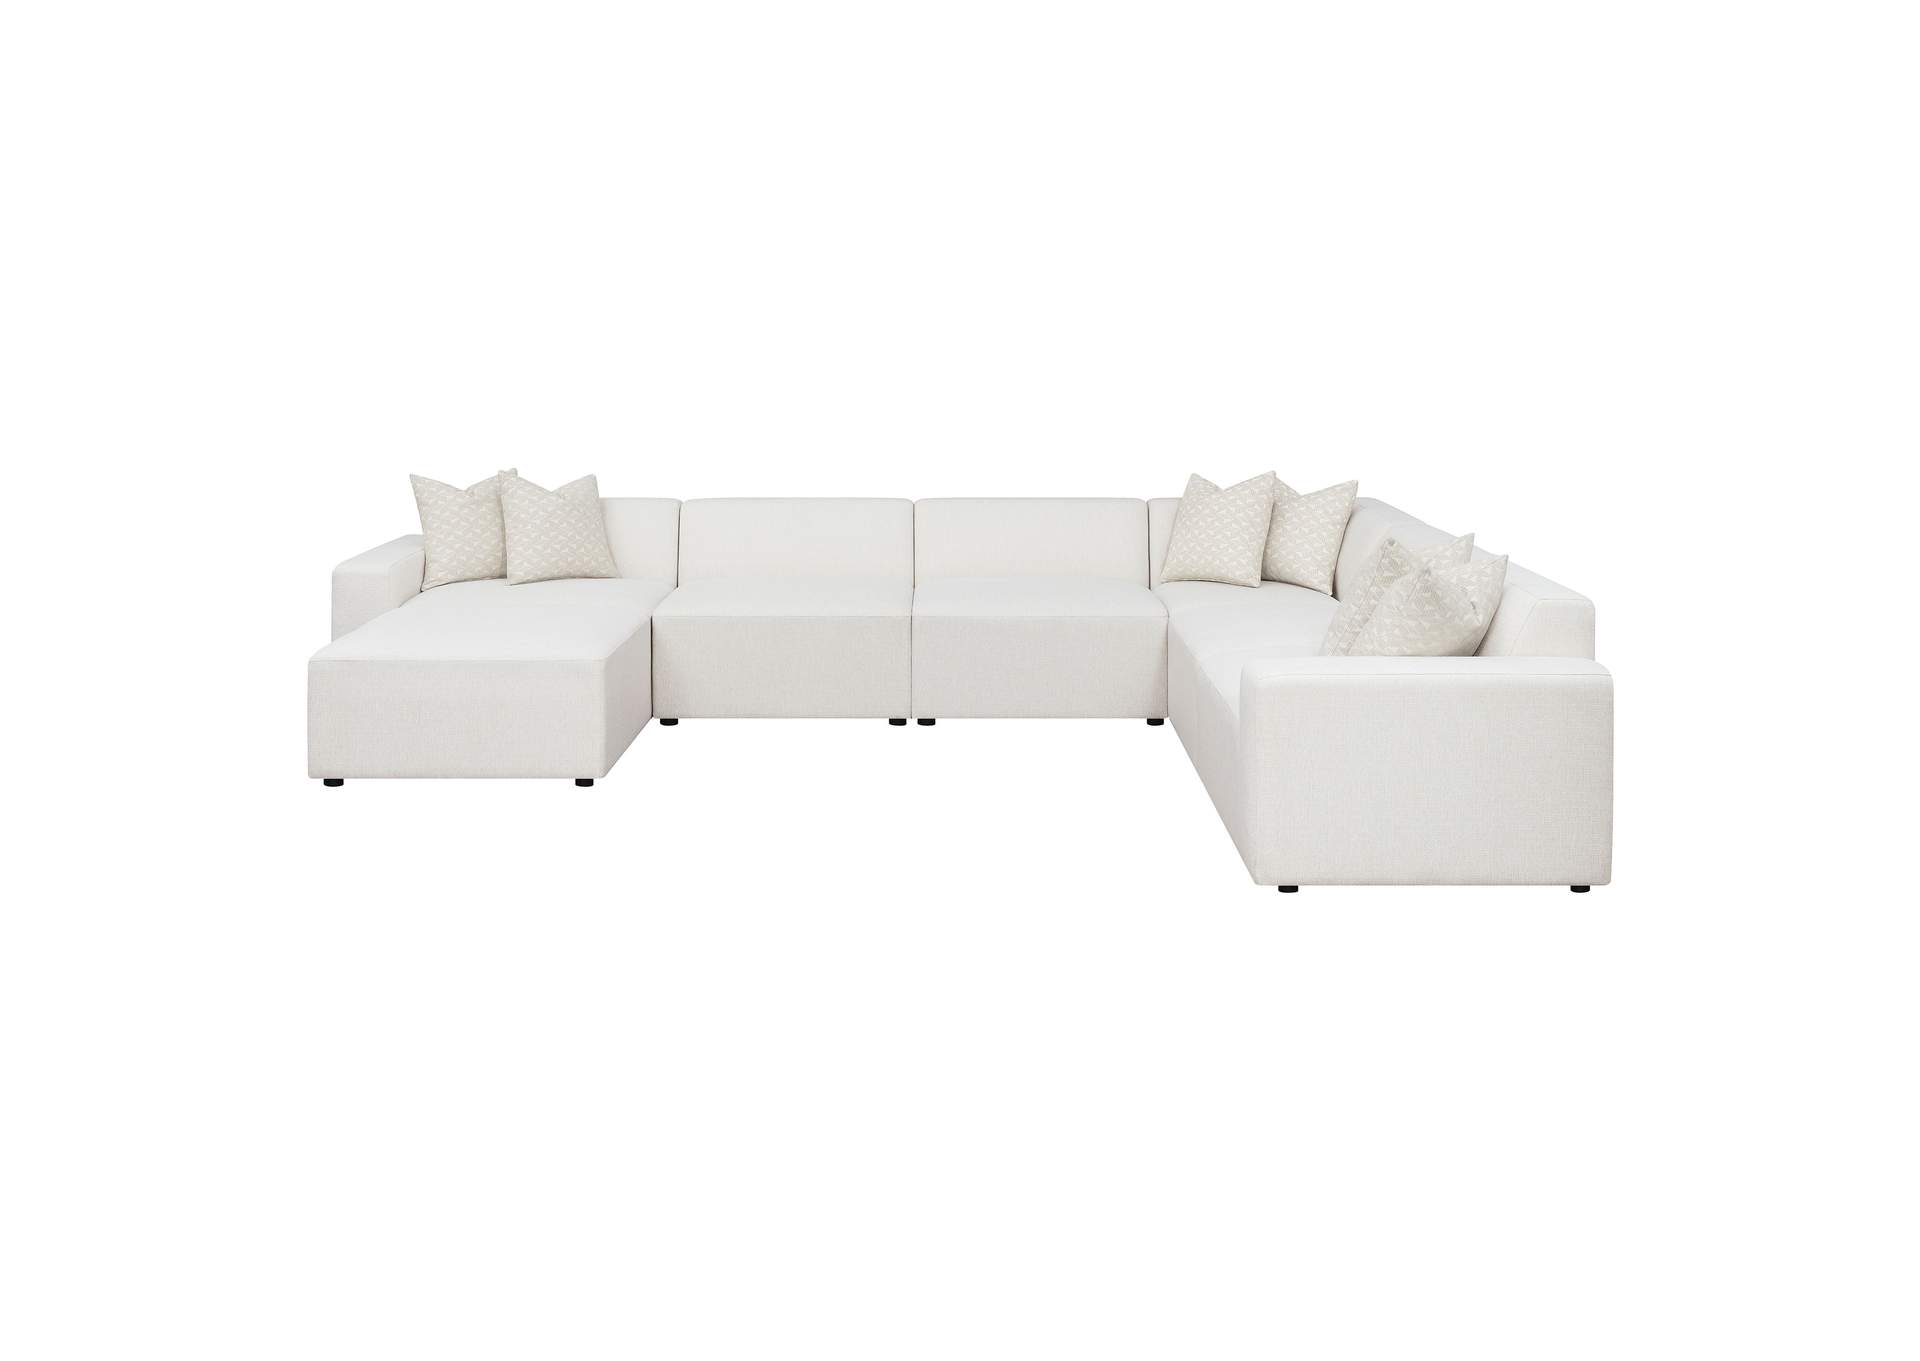 Freddie 7-piece Upholstered Modular Sectional Pearl,Coaster Furniture